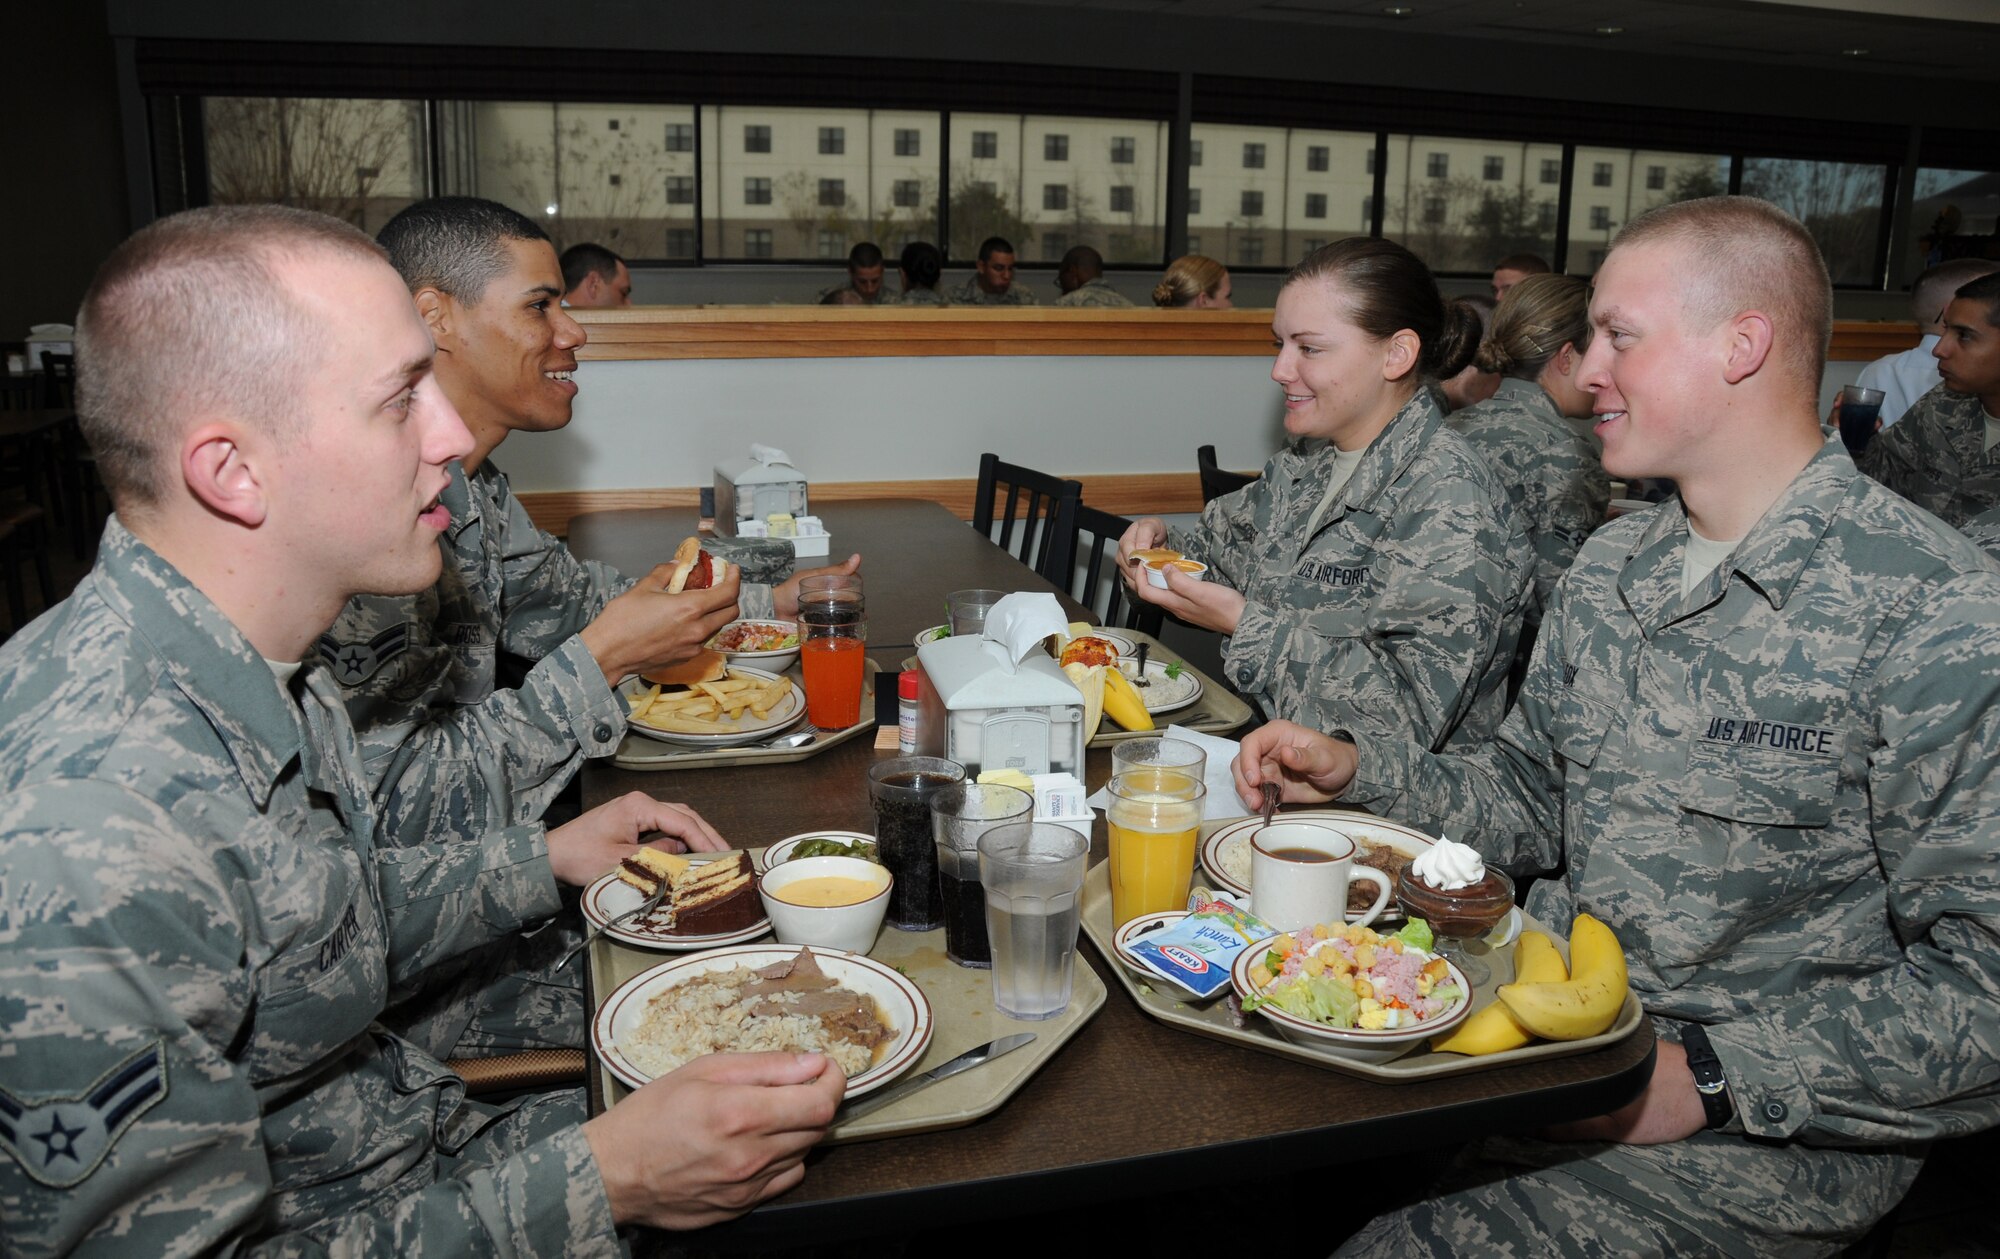 Airmen 1st Class Matthew Carter and Skyler Ross, Airman Basic Destiny Boggs, and Airman 1st Class Cody Fox, 334th Training Squadron, eat lunch at the Azalea Dining Facility, Keesler Air Force Base, Miss., Feb. 6, 2012.  Keesler is this year’s Air Education and Training Command nominee for the John L. Hennessy Award as the top food service operation in the Air Force in the multiple facility category..  (U.S. Air Force photo by Kemberly Groue)